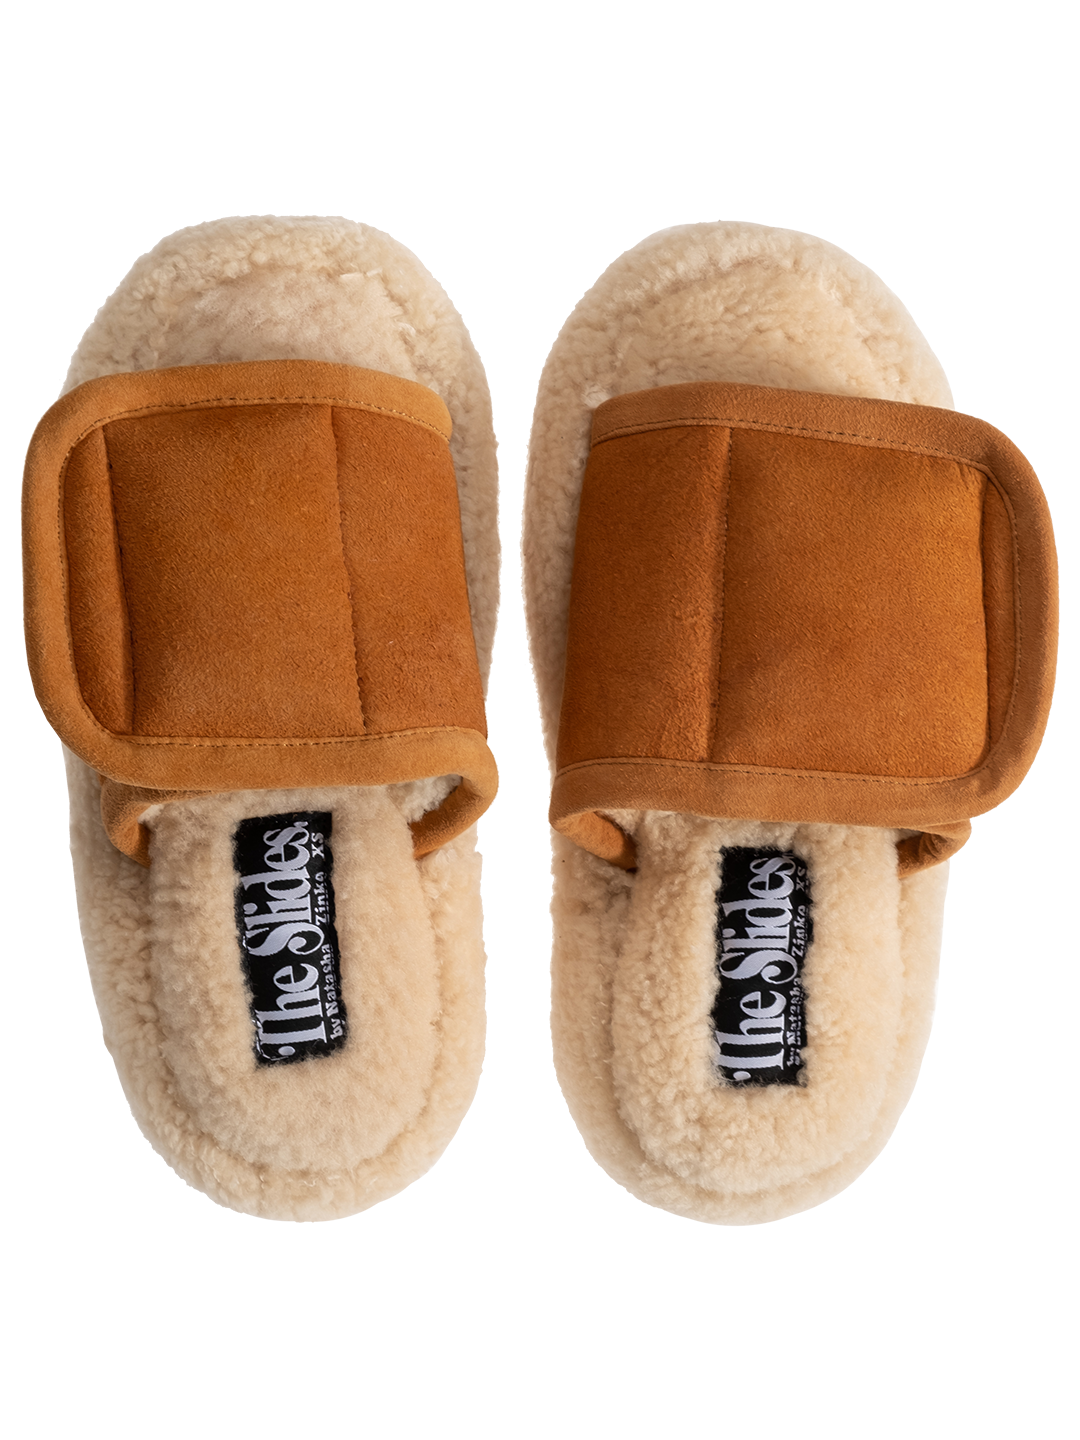 The Shearling Slides.